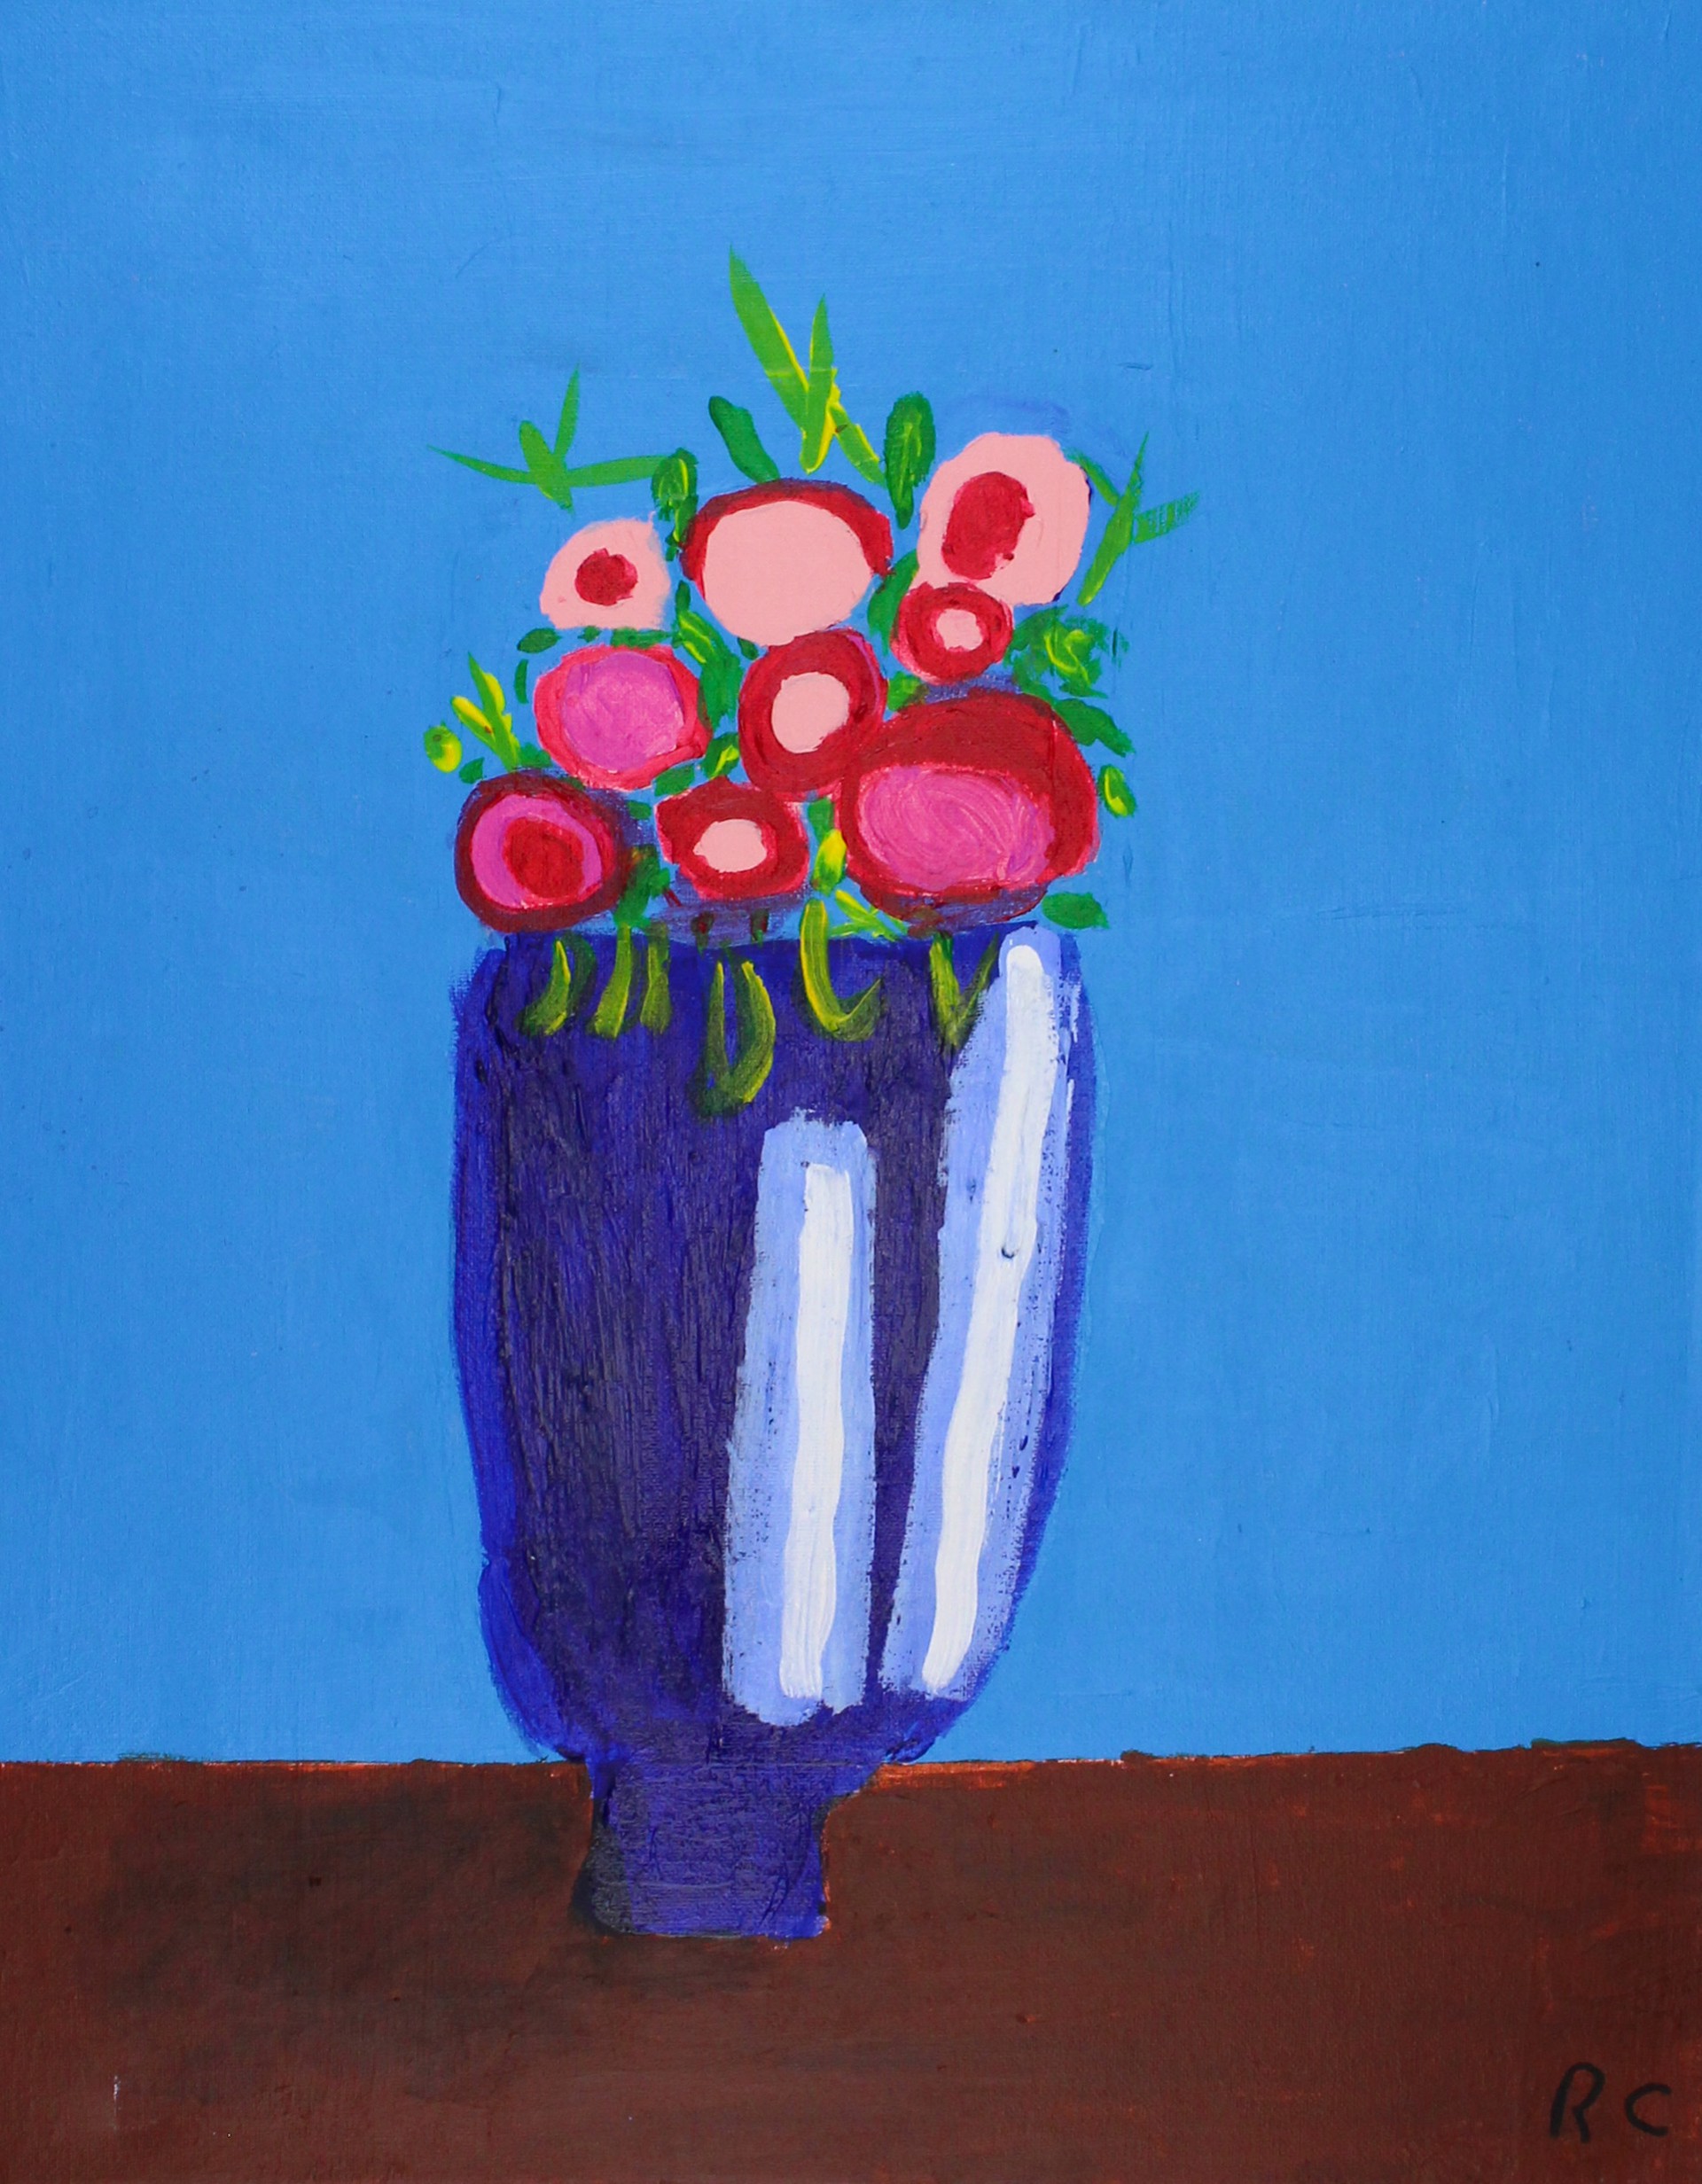 Summer Flowers in a Vase by Robert Corcoran